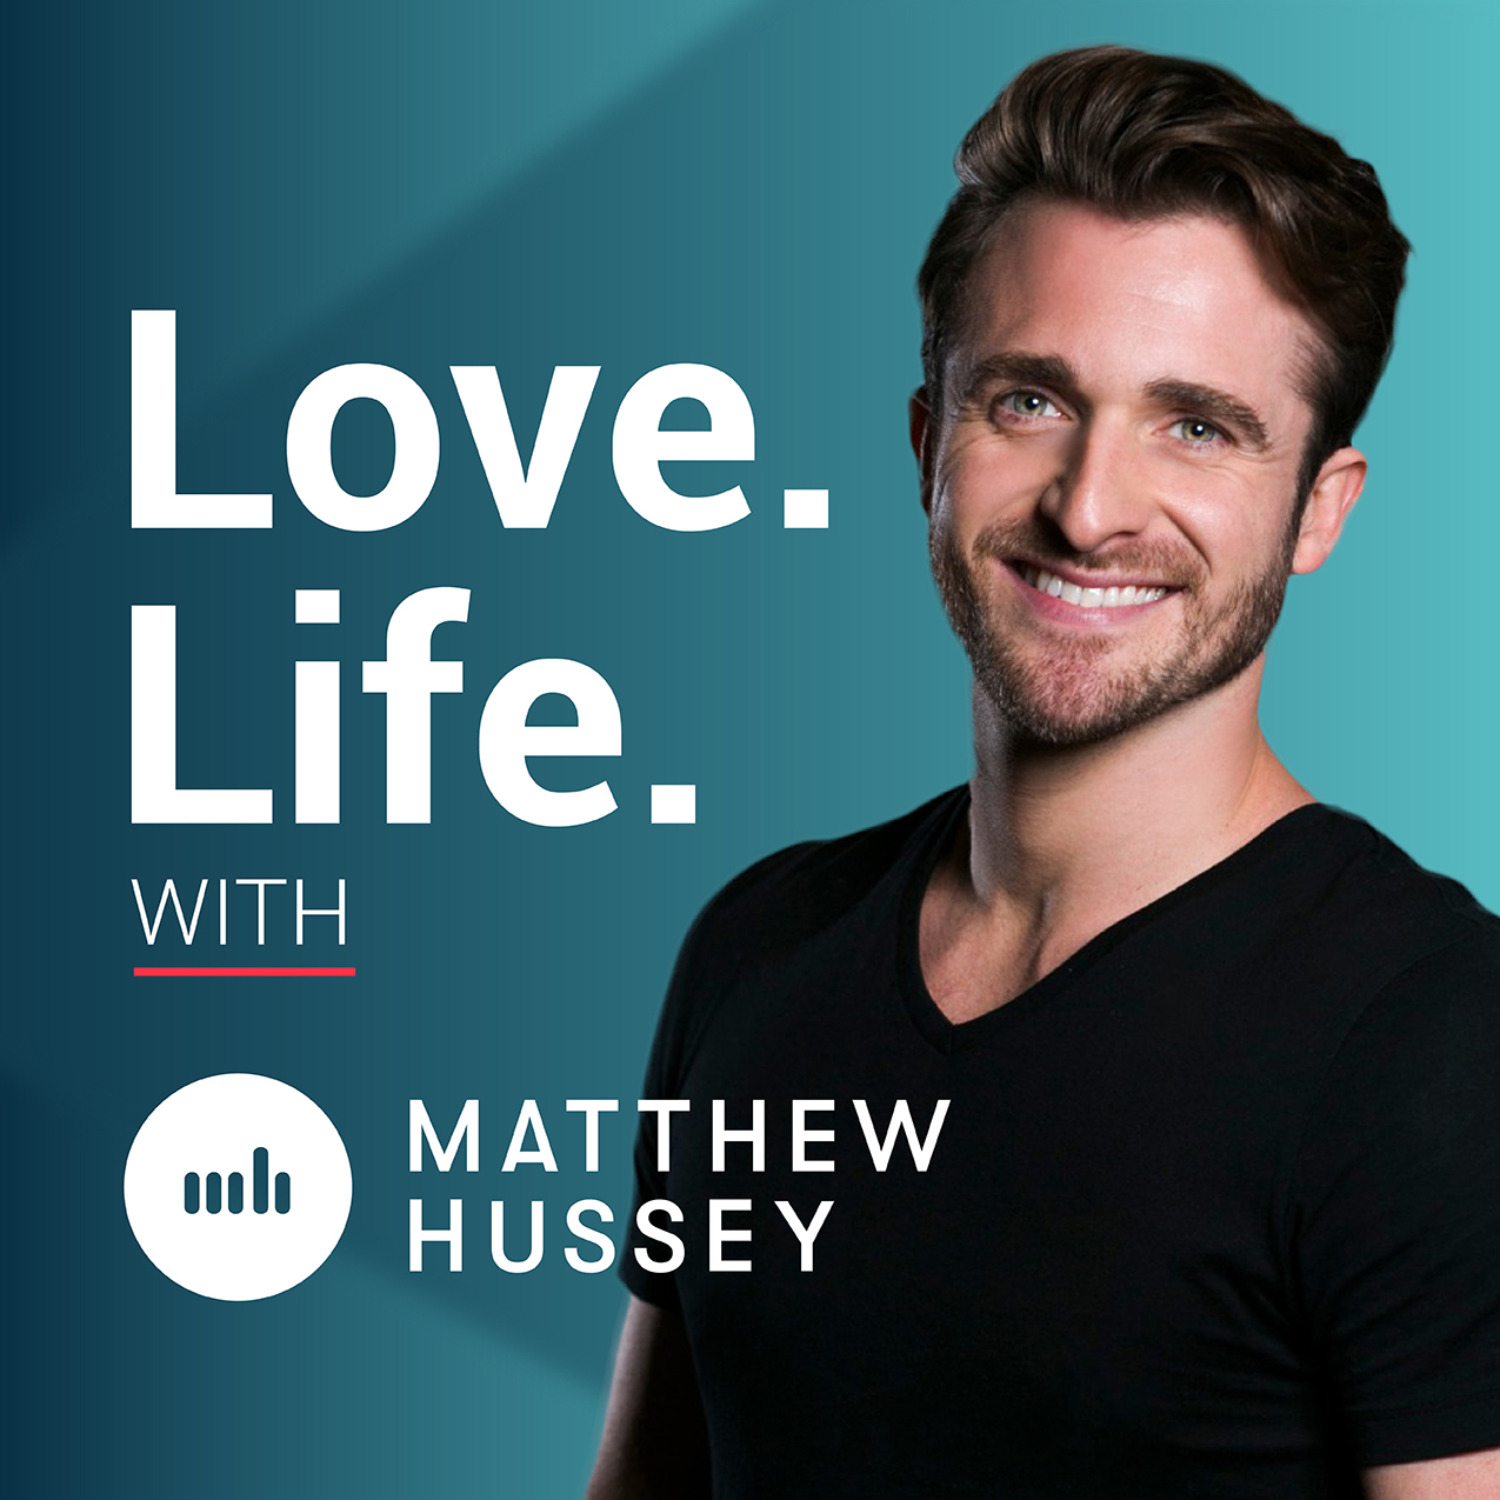 Love Life with Matthew Hussey iHeart